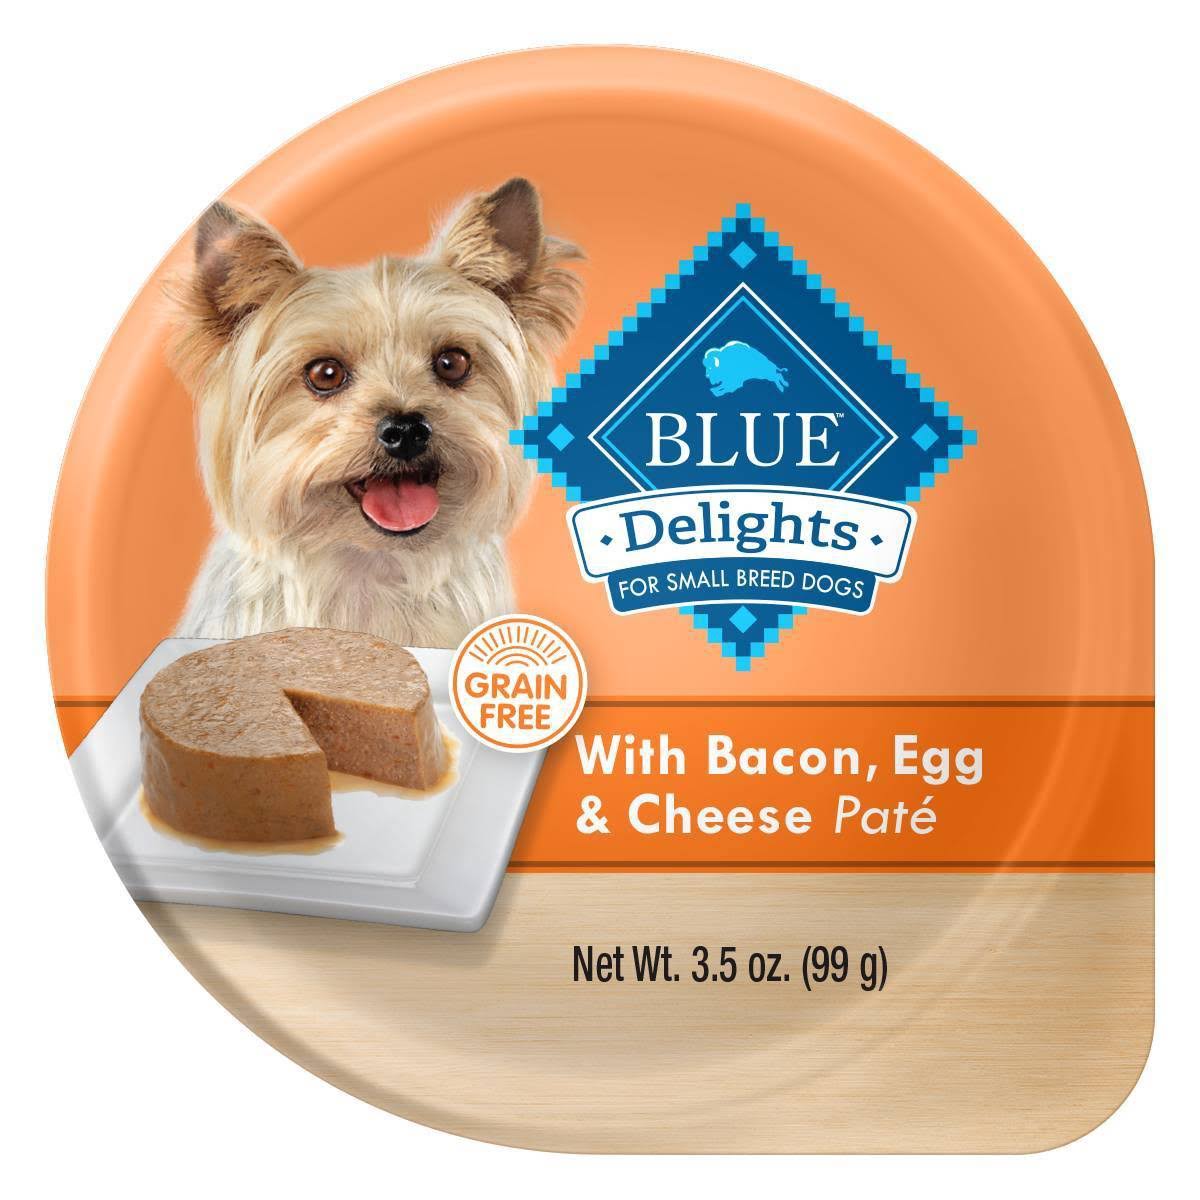 Blue Buffalo Blue Delights Dog Food, with Bacon, Egg & Cheese Pate, Grain Free, For Small Breed Dogs - 3.5 oz